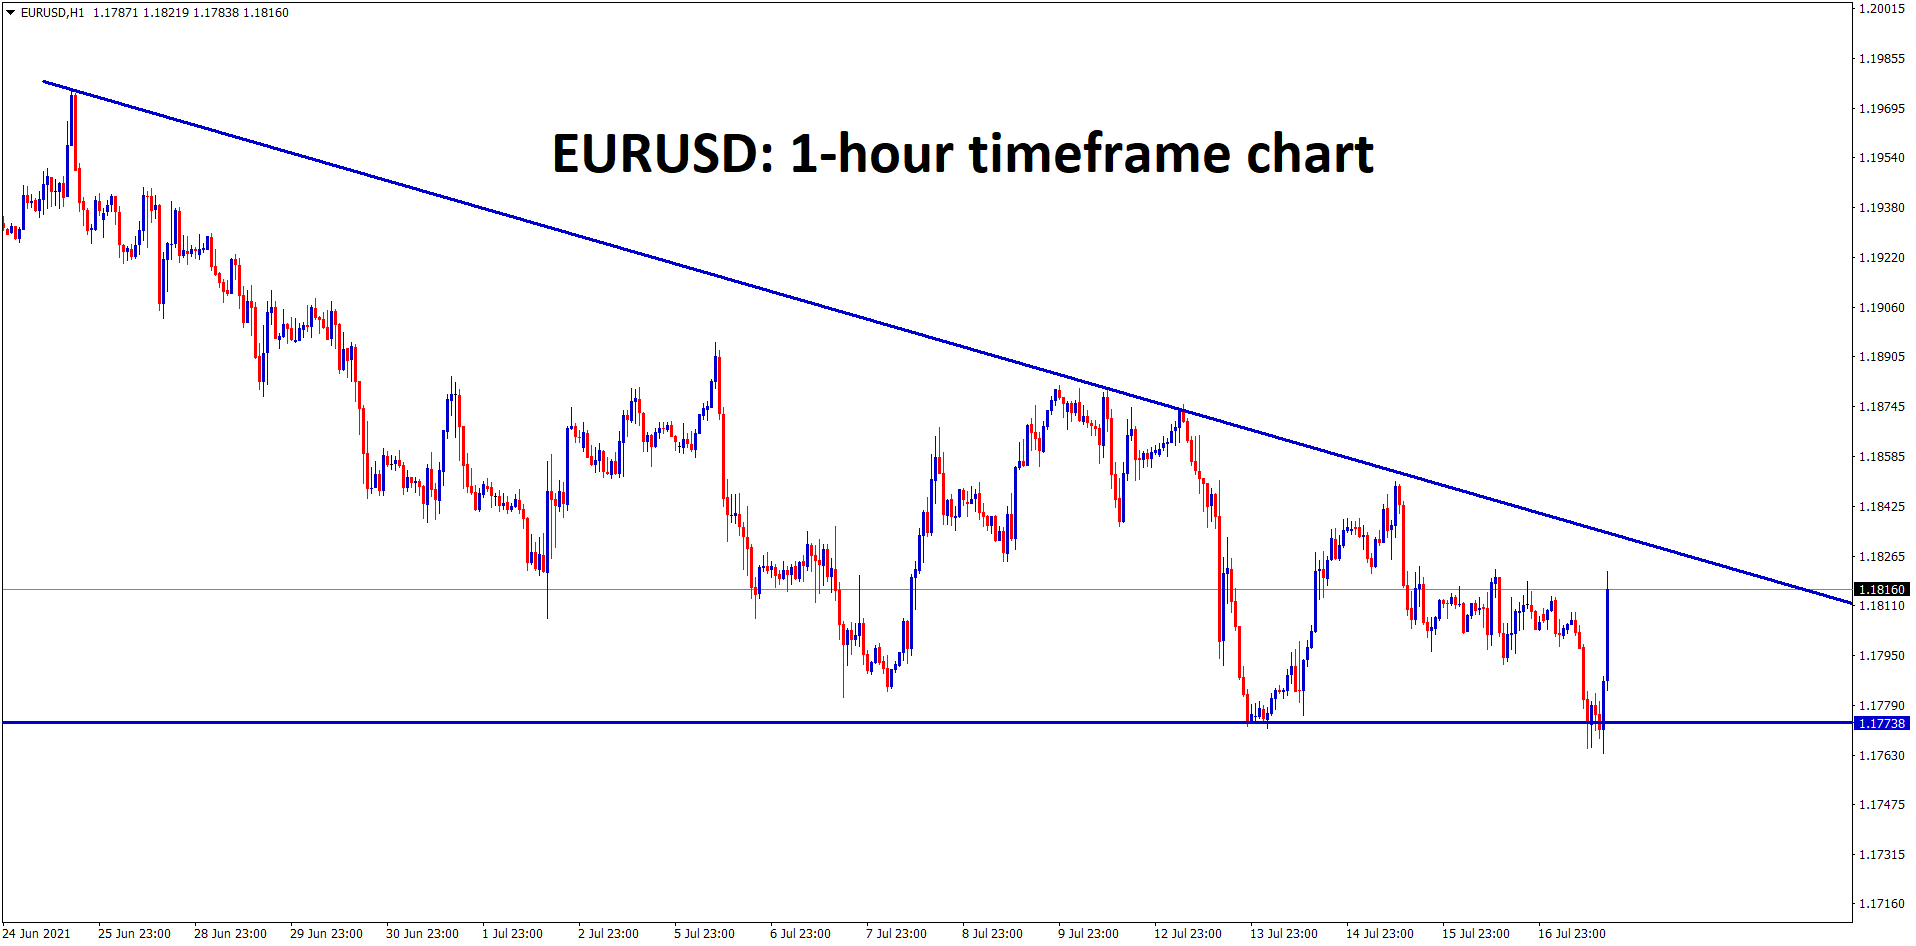 EURUSD has formed a descending Triangle pattern wait for the breakout from this triangle